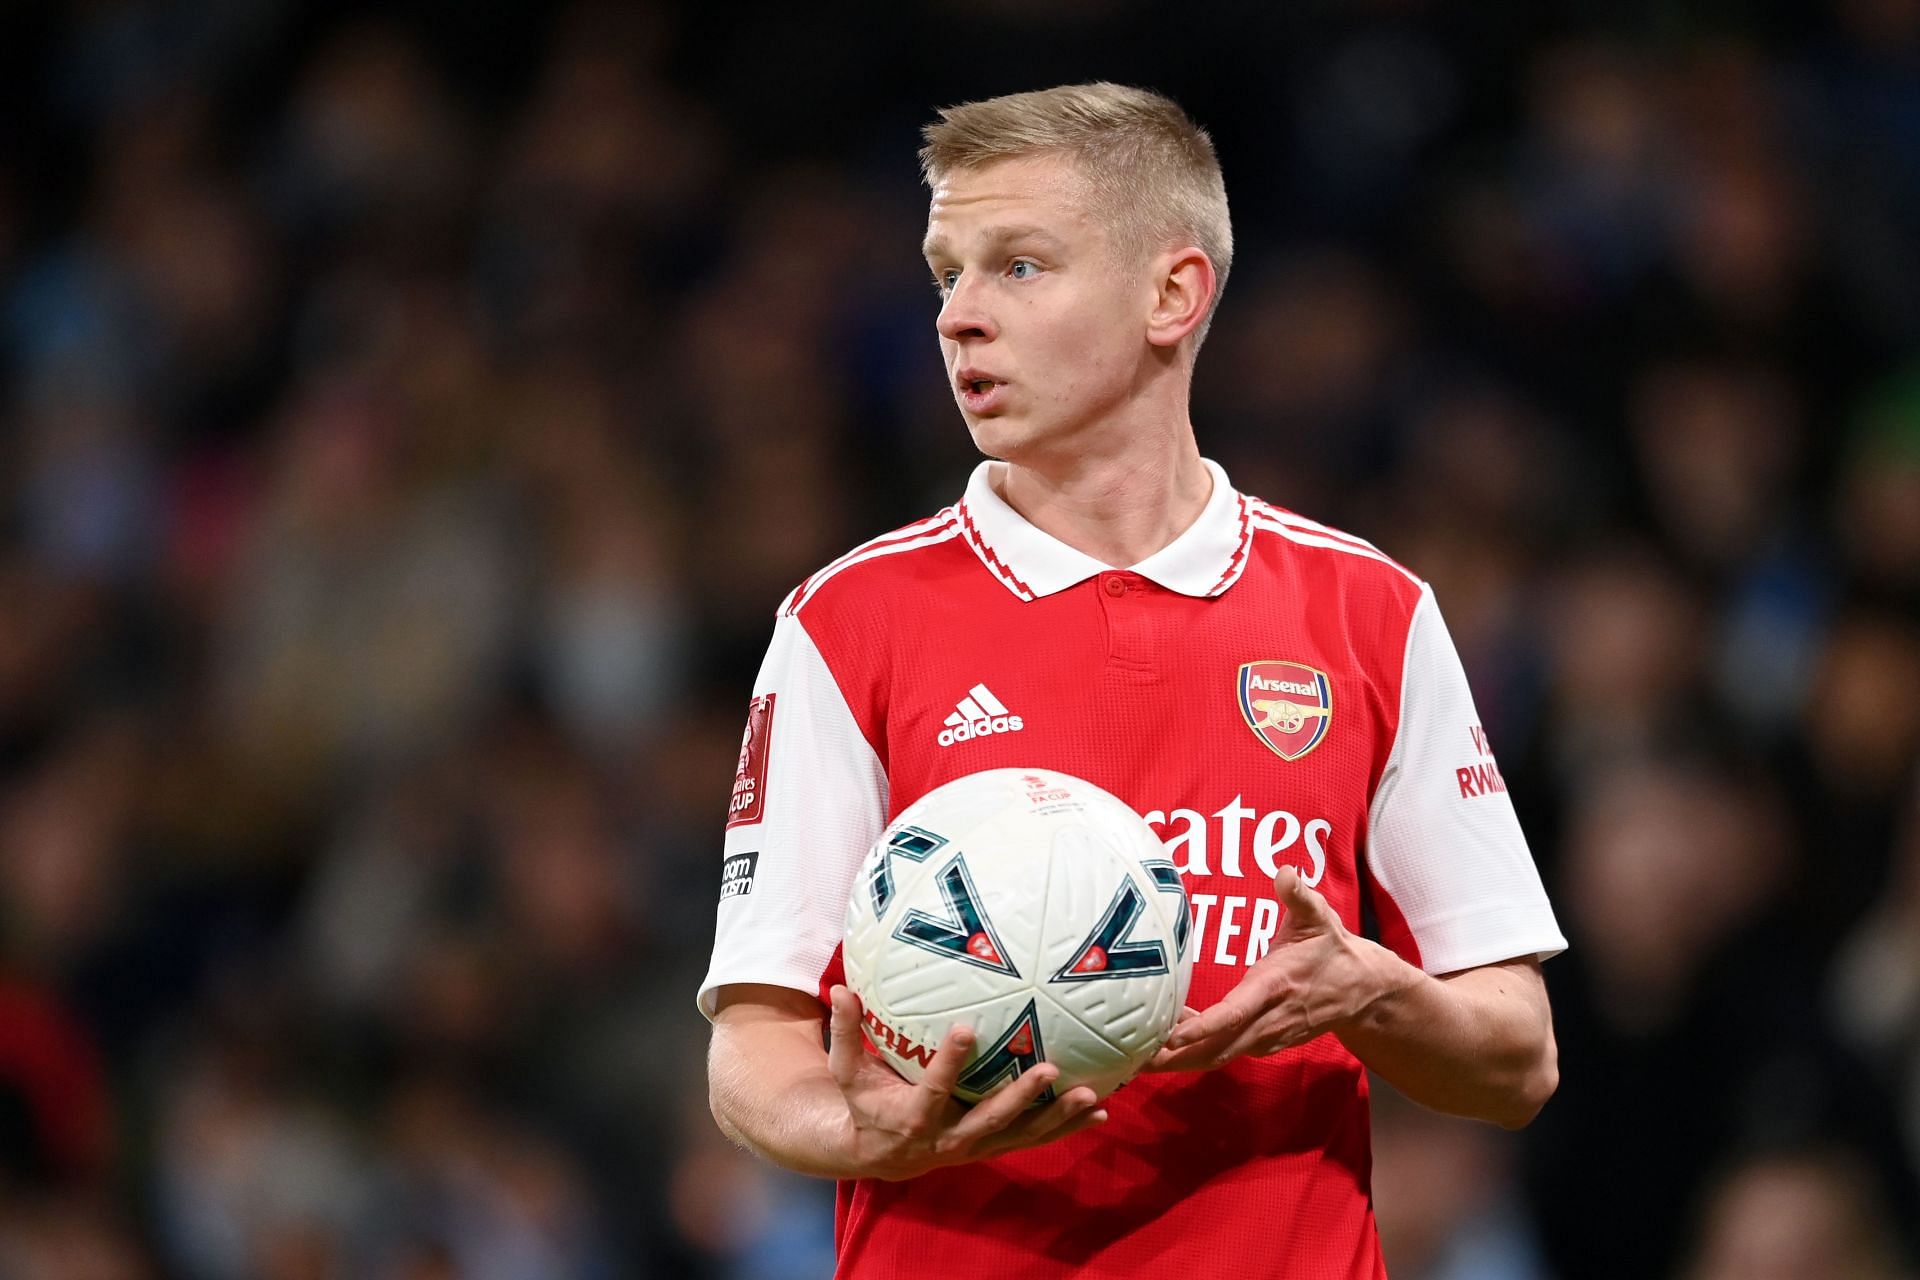 Tony Adams has suggested Zinchenko (pictured) be on the bench for the City clash.